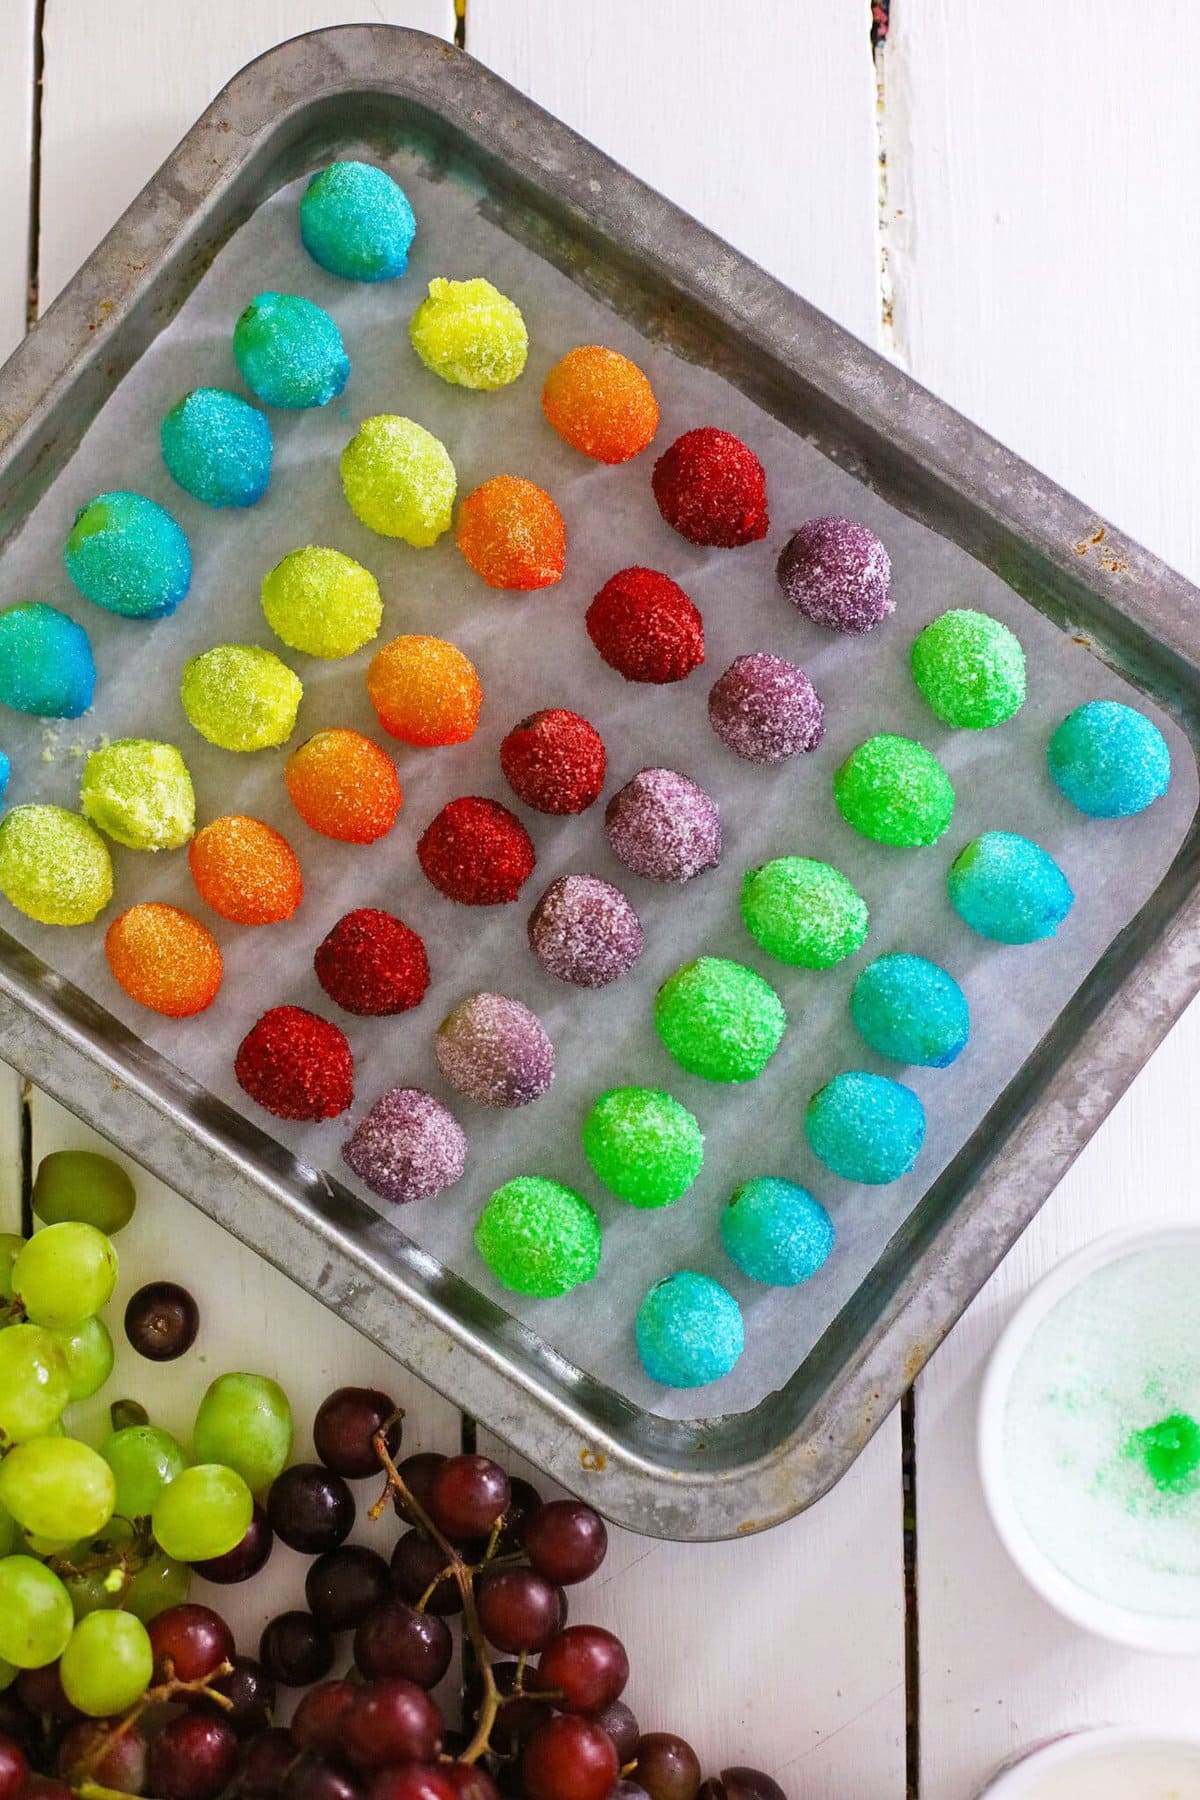 The coated grapes on a cookie sheet.